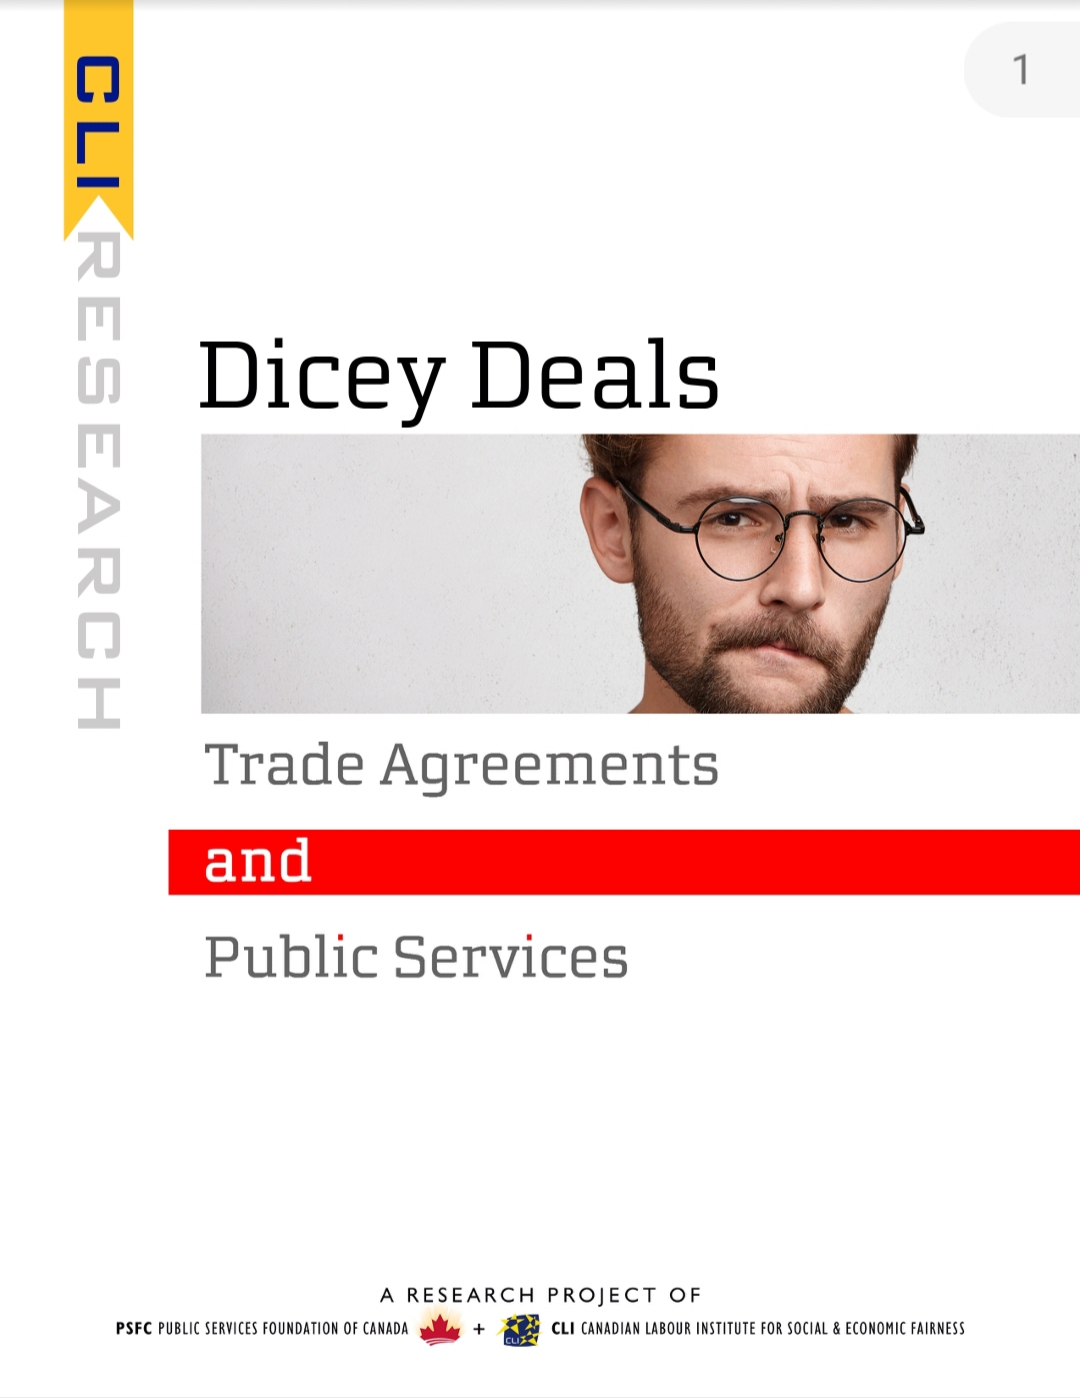 Dicey Deals: Trade Agreements and Public Services